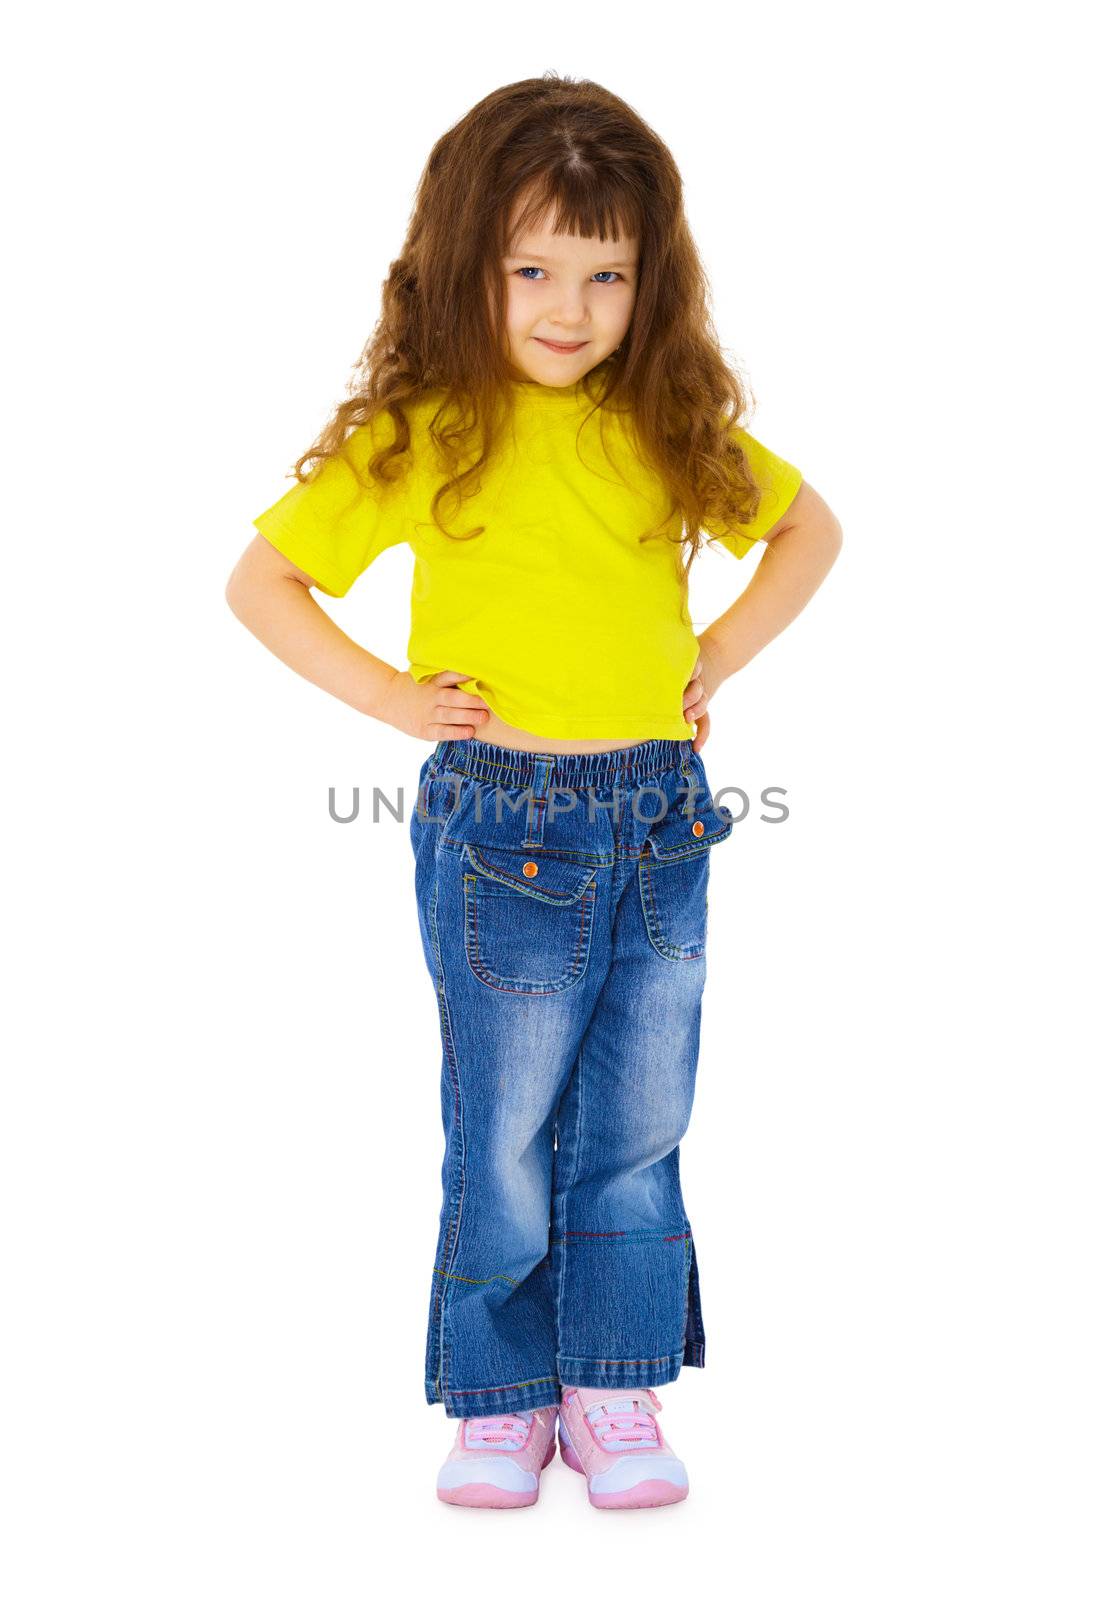 Serious little girl in jeans isolated on white background